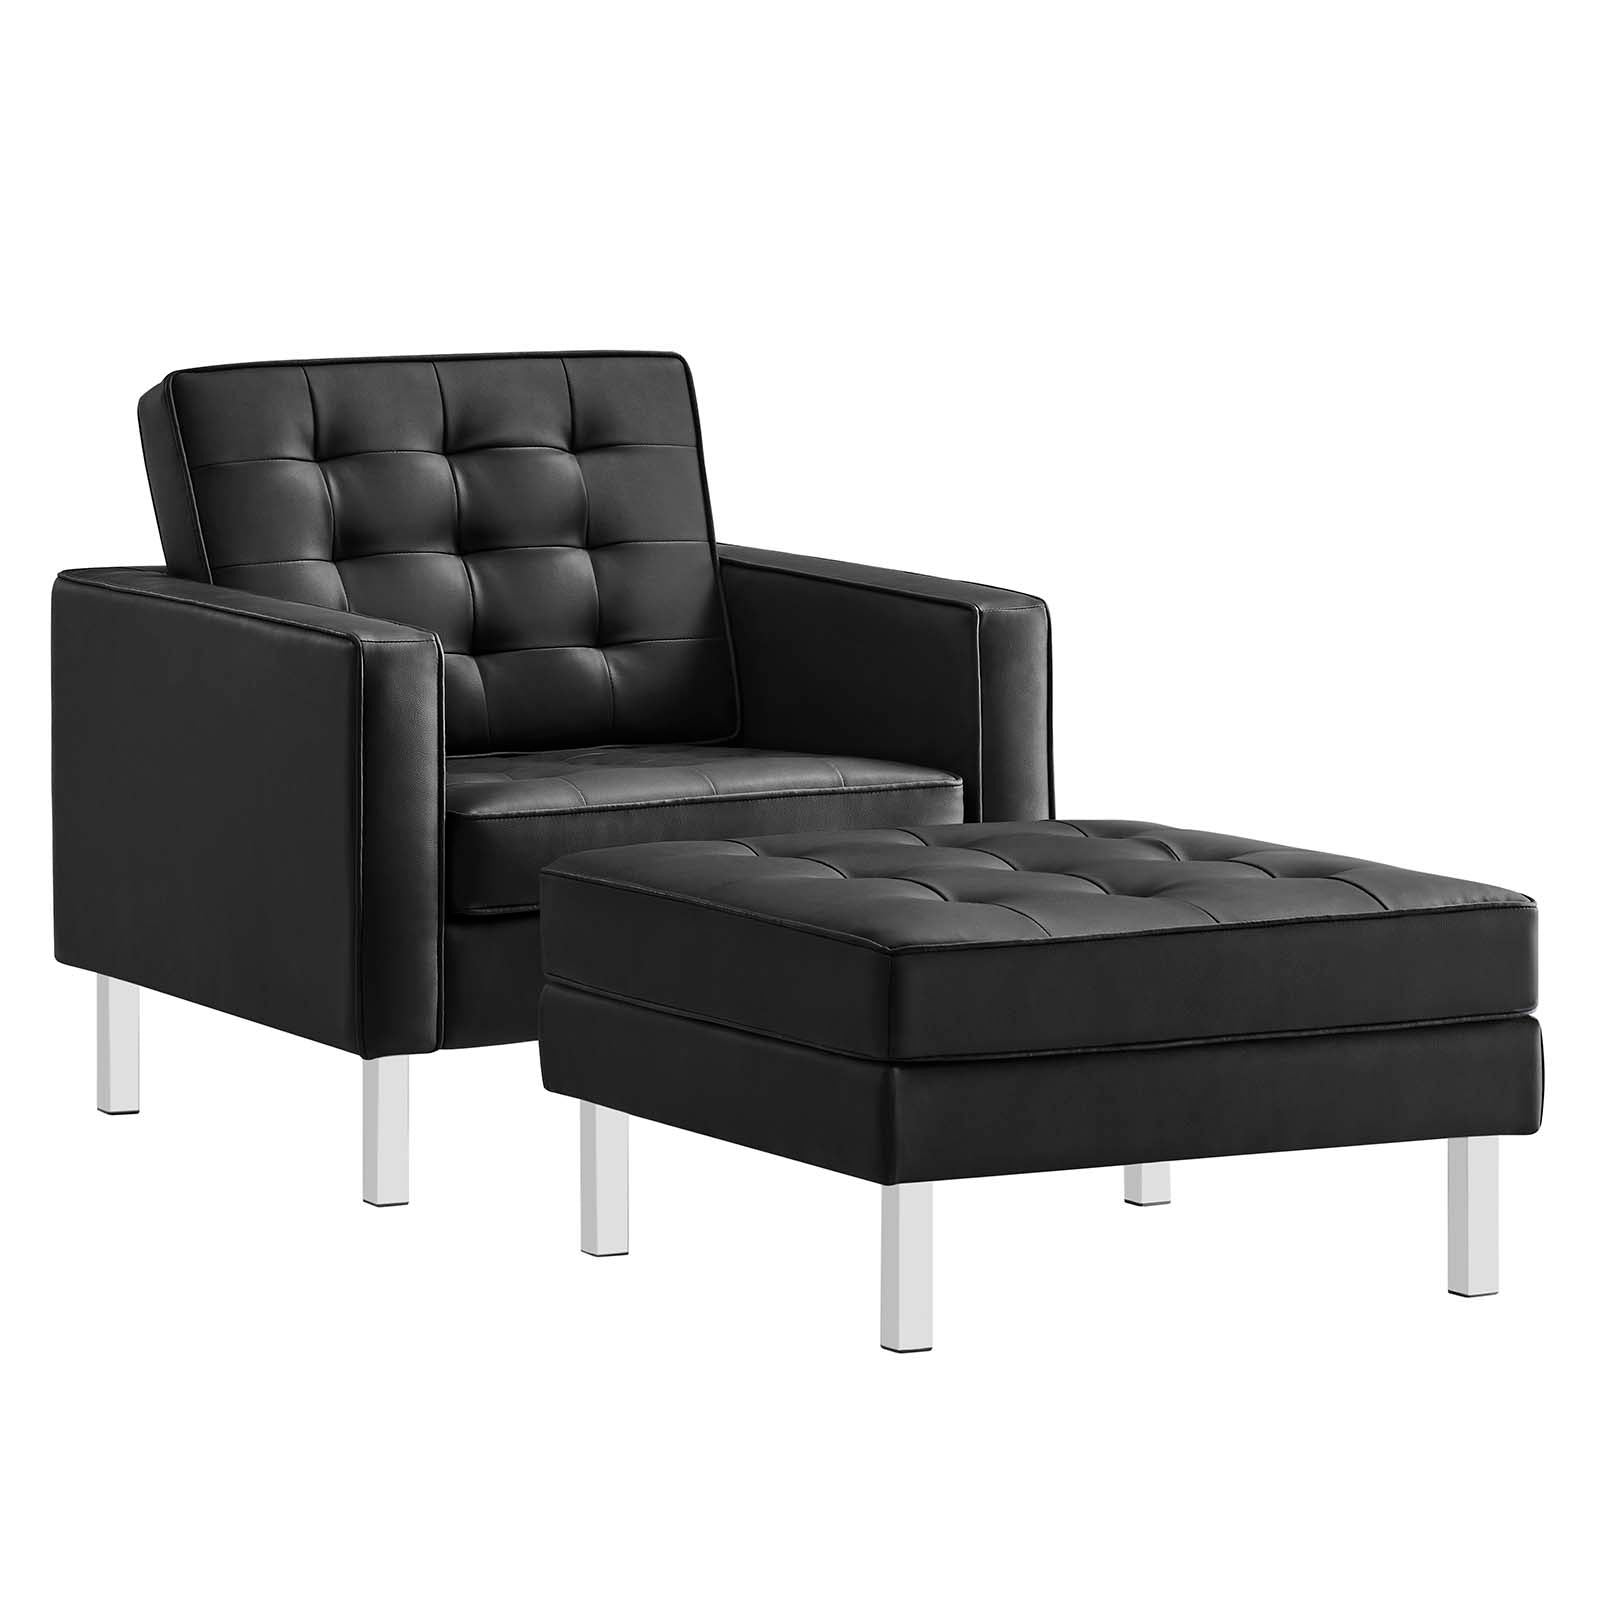 Modway Living Room Sets - Loft-Tufted-Vegan-Leather-Armchair-and-Ottoman-Set-Silver-Black